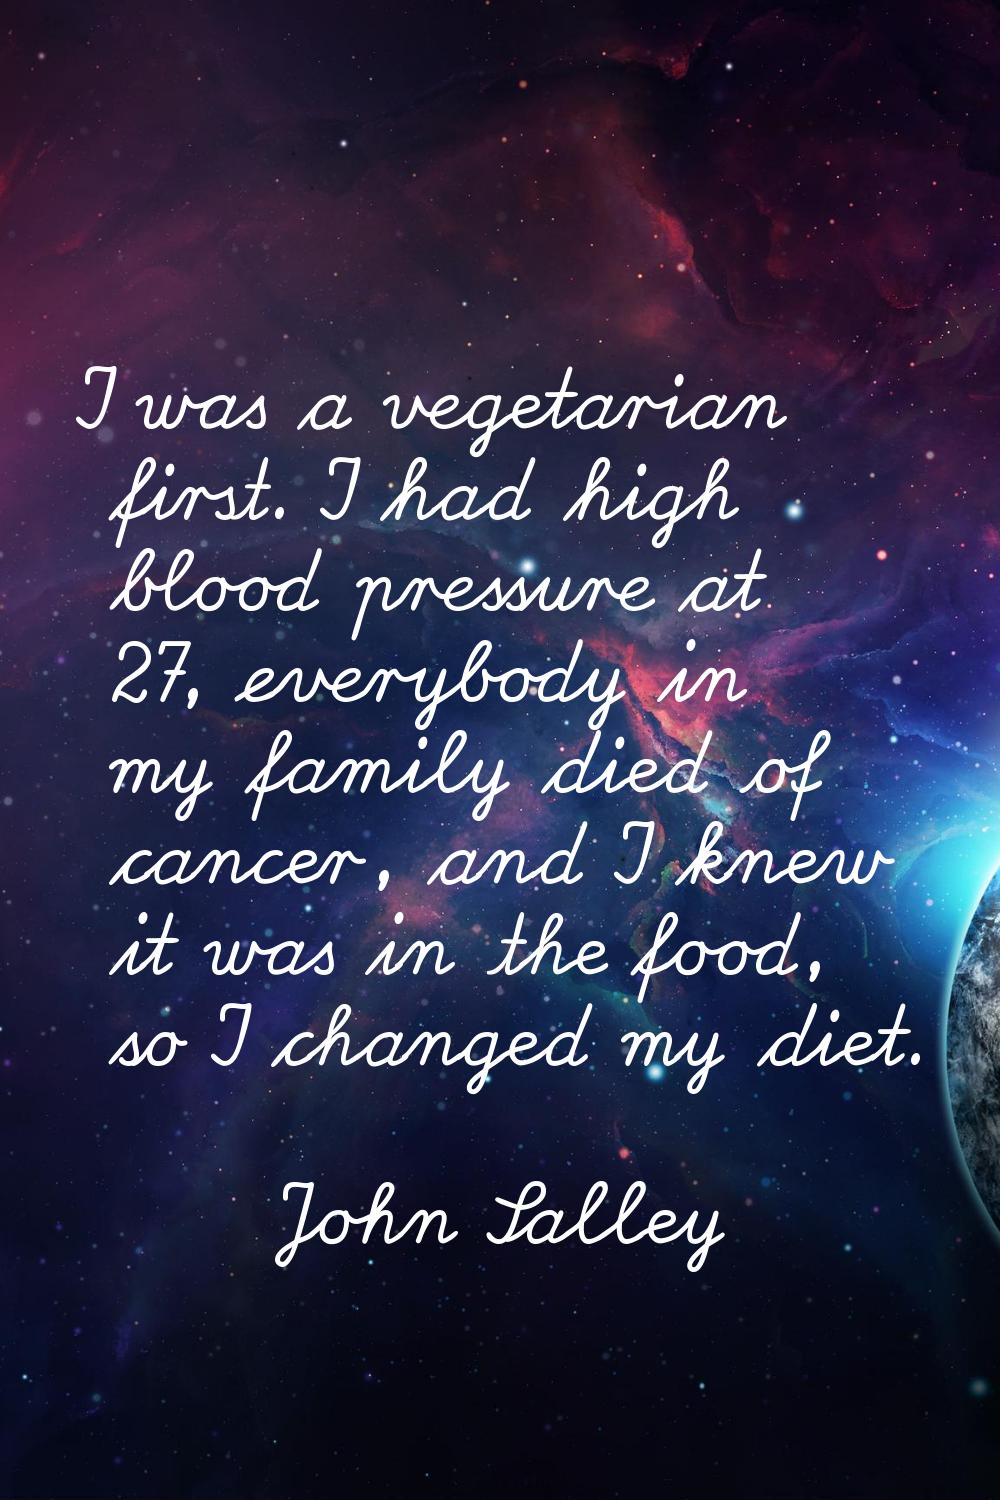 I was a vegetarian first. I had high blood pressure at 27, everybody in my family died of cancer, a